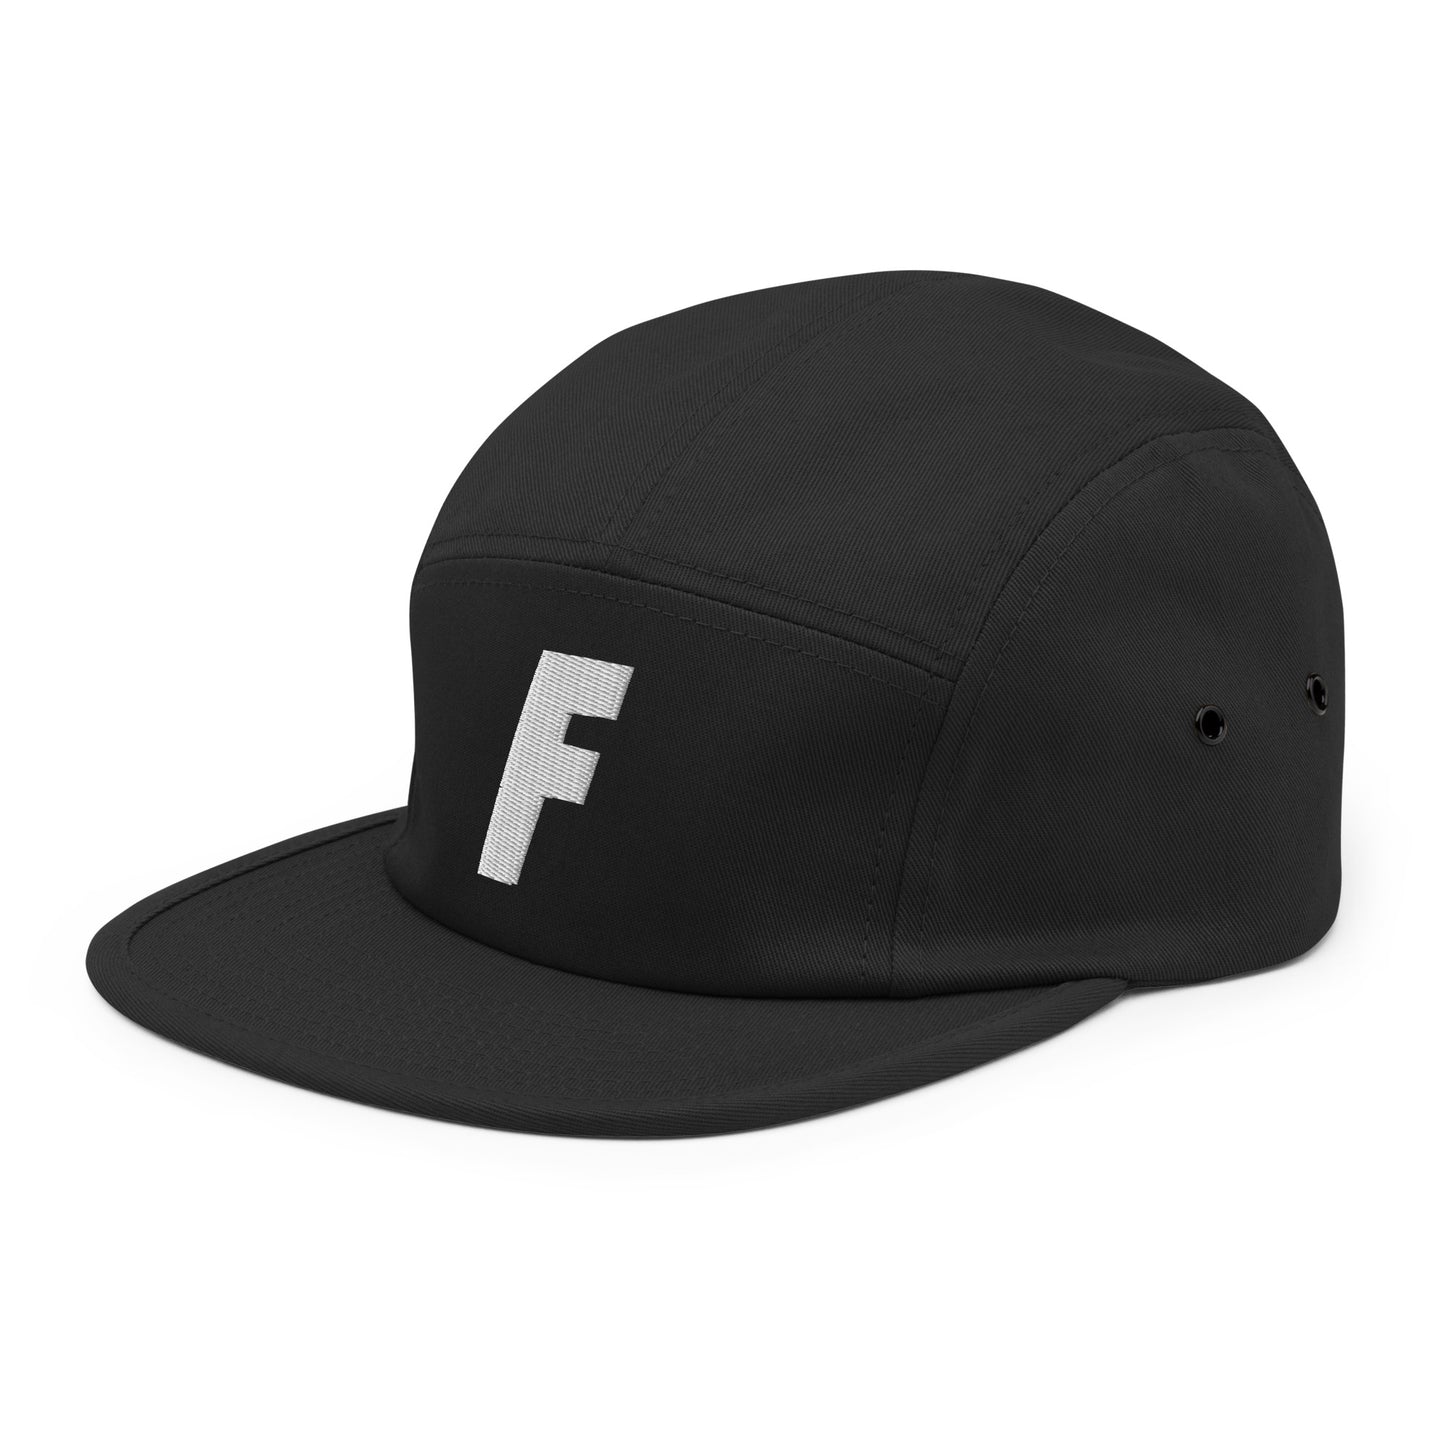 (06) f in the chat (the HAT)